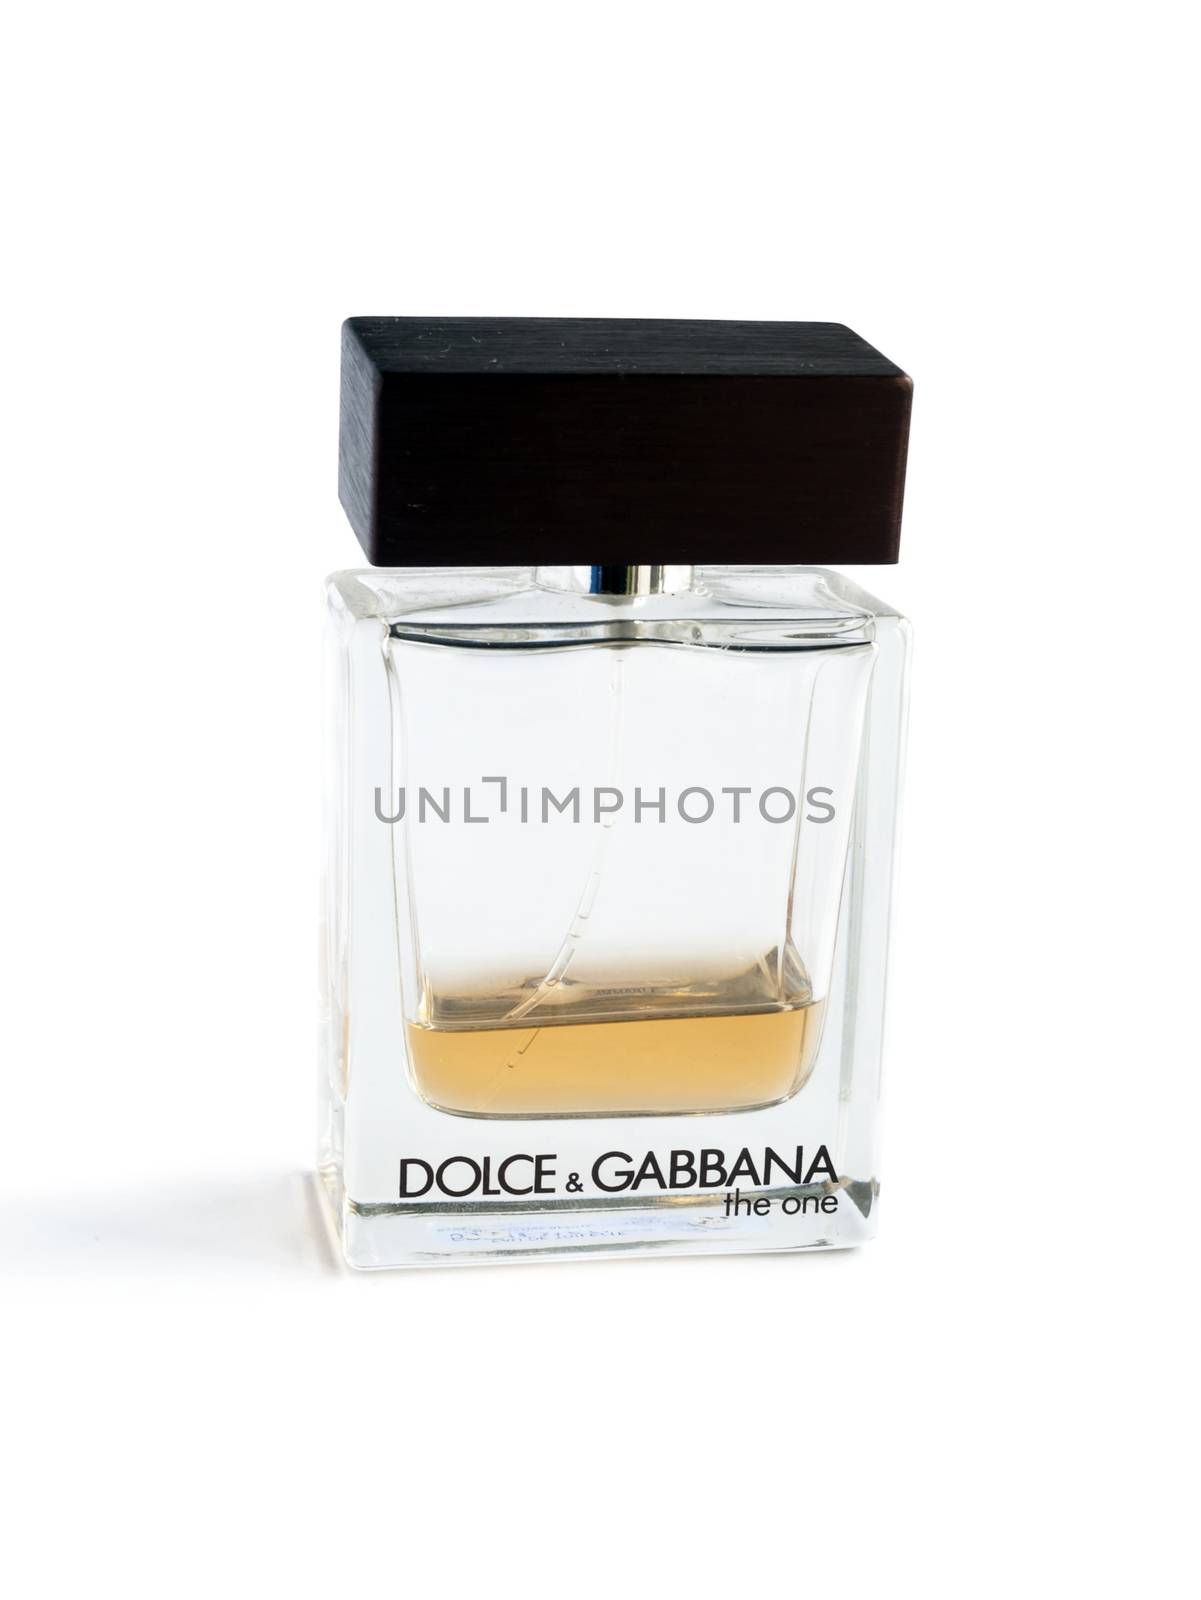 Bucharest, Romania - January 24th: A bottle of Dolce & Gabbana men perfume isolated on white background. Dolce & Gabbana won an Oscar for best male perfume in 1996.